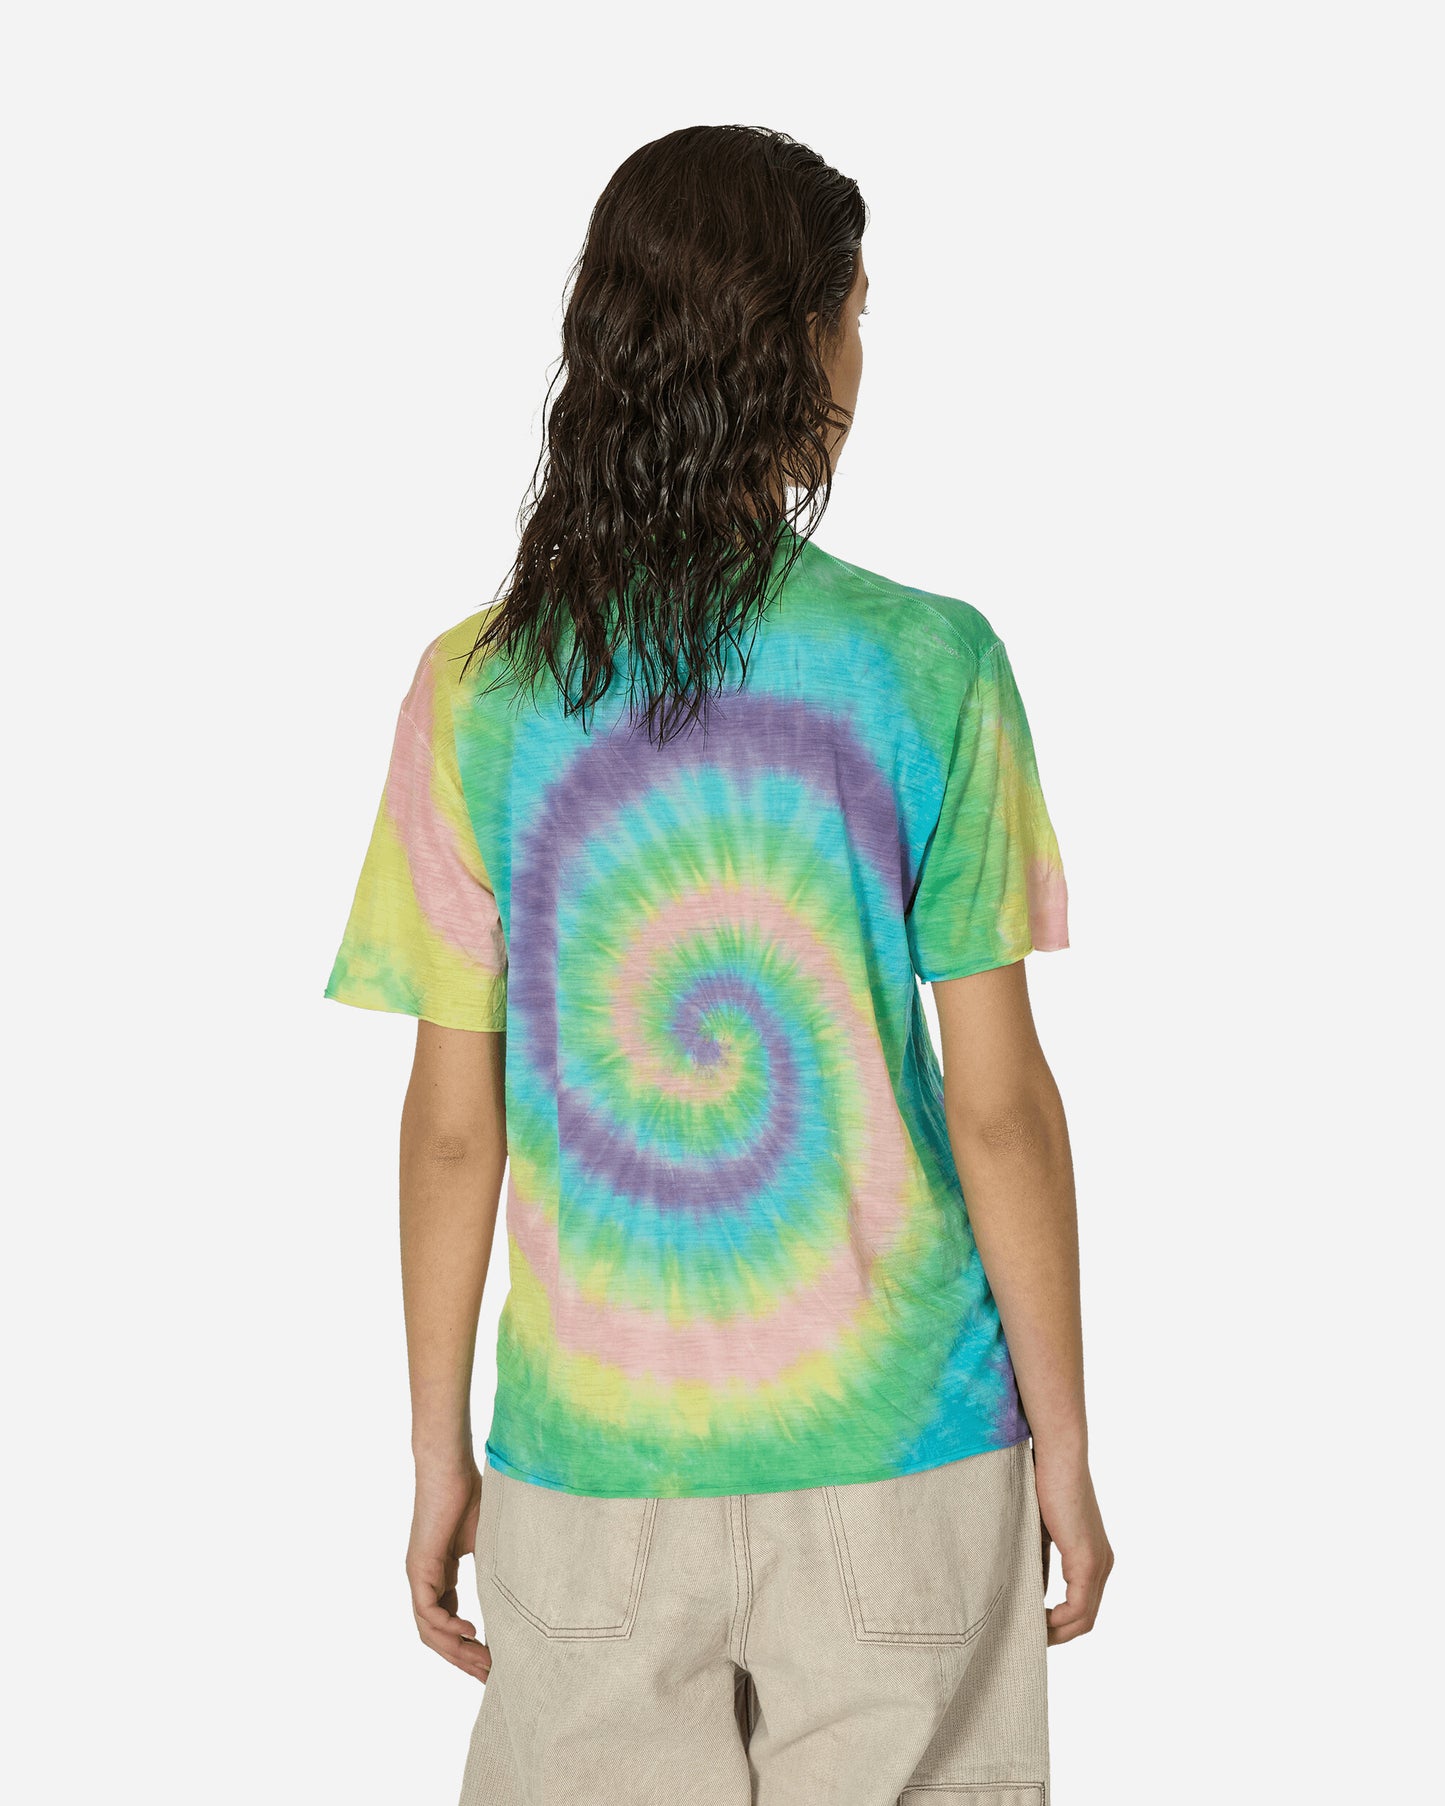 Satisfy Cloudmerino T-Shirt Tie-Dye Psychedelic T-Shirts Shortsleeve 5088 TDPS-CO